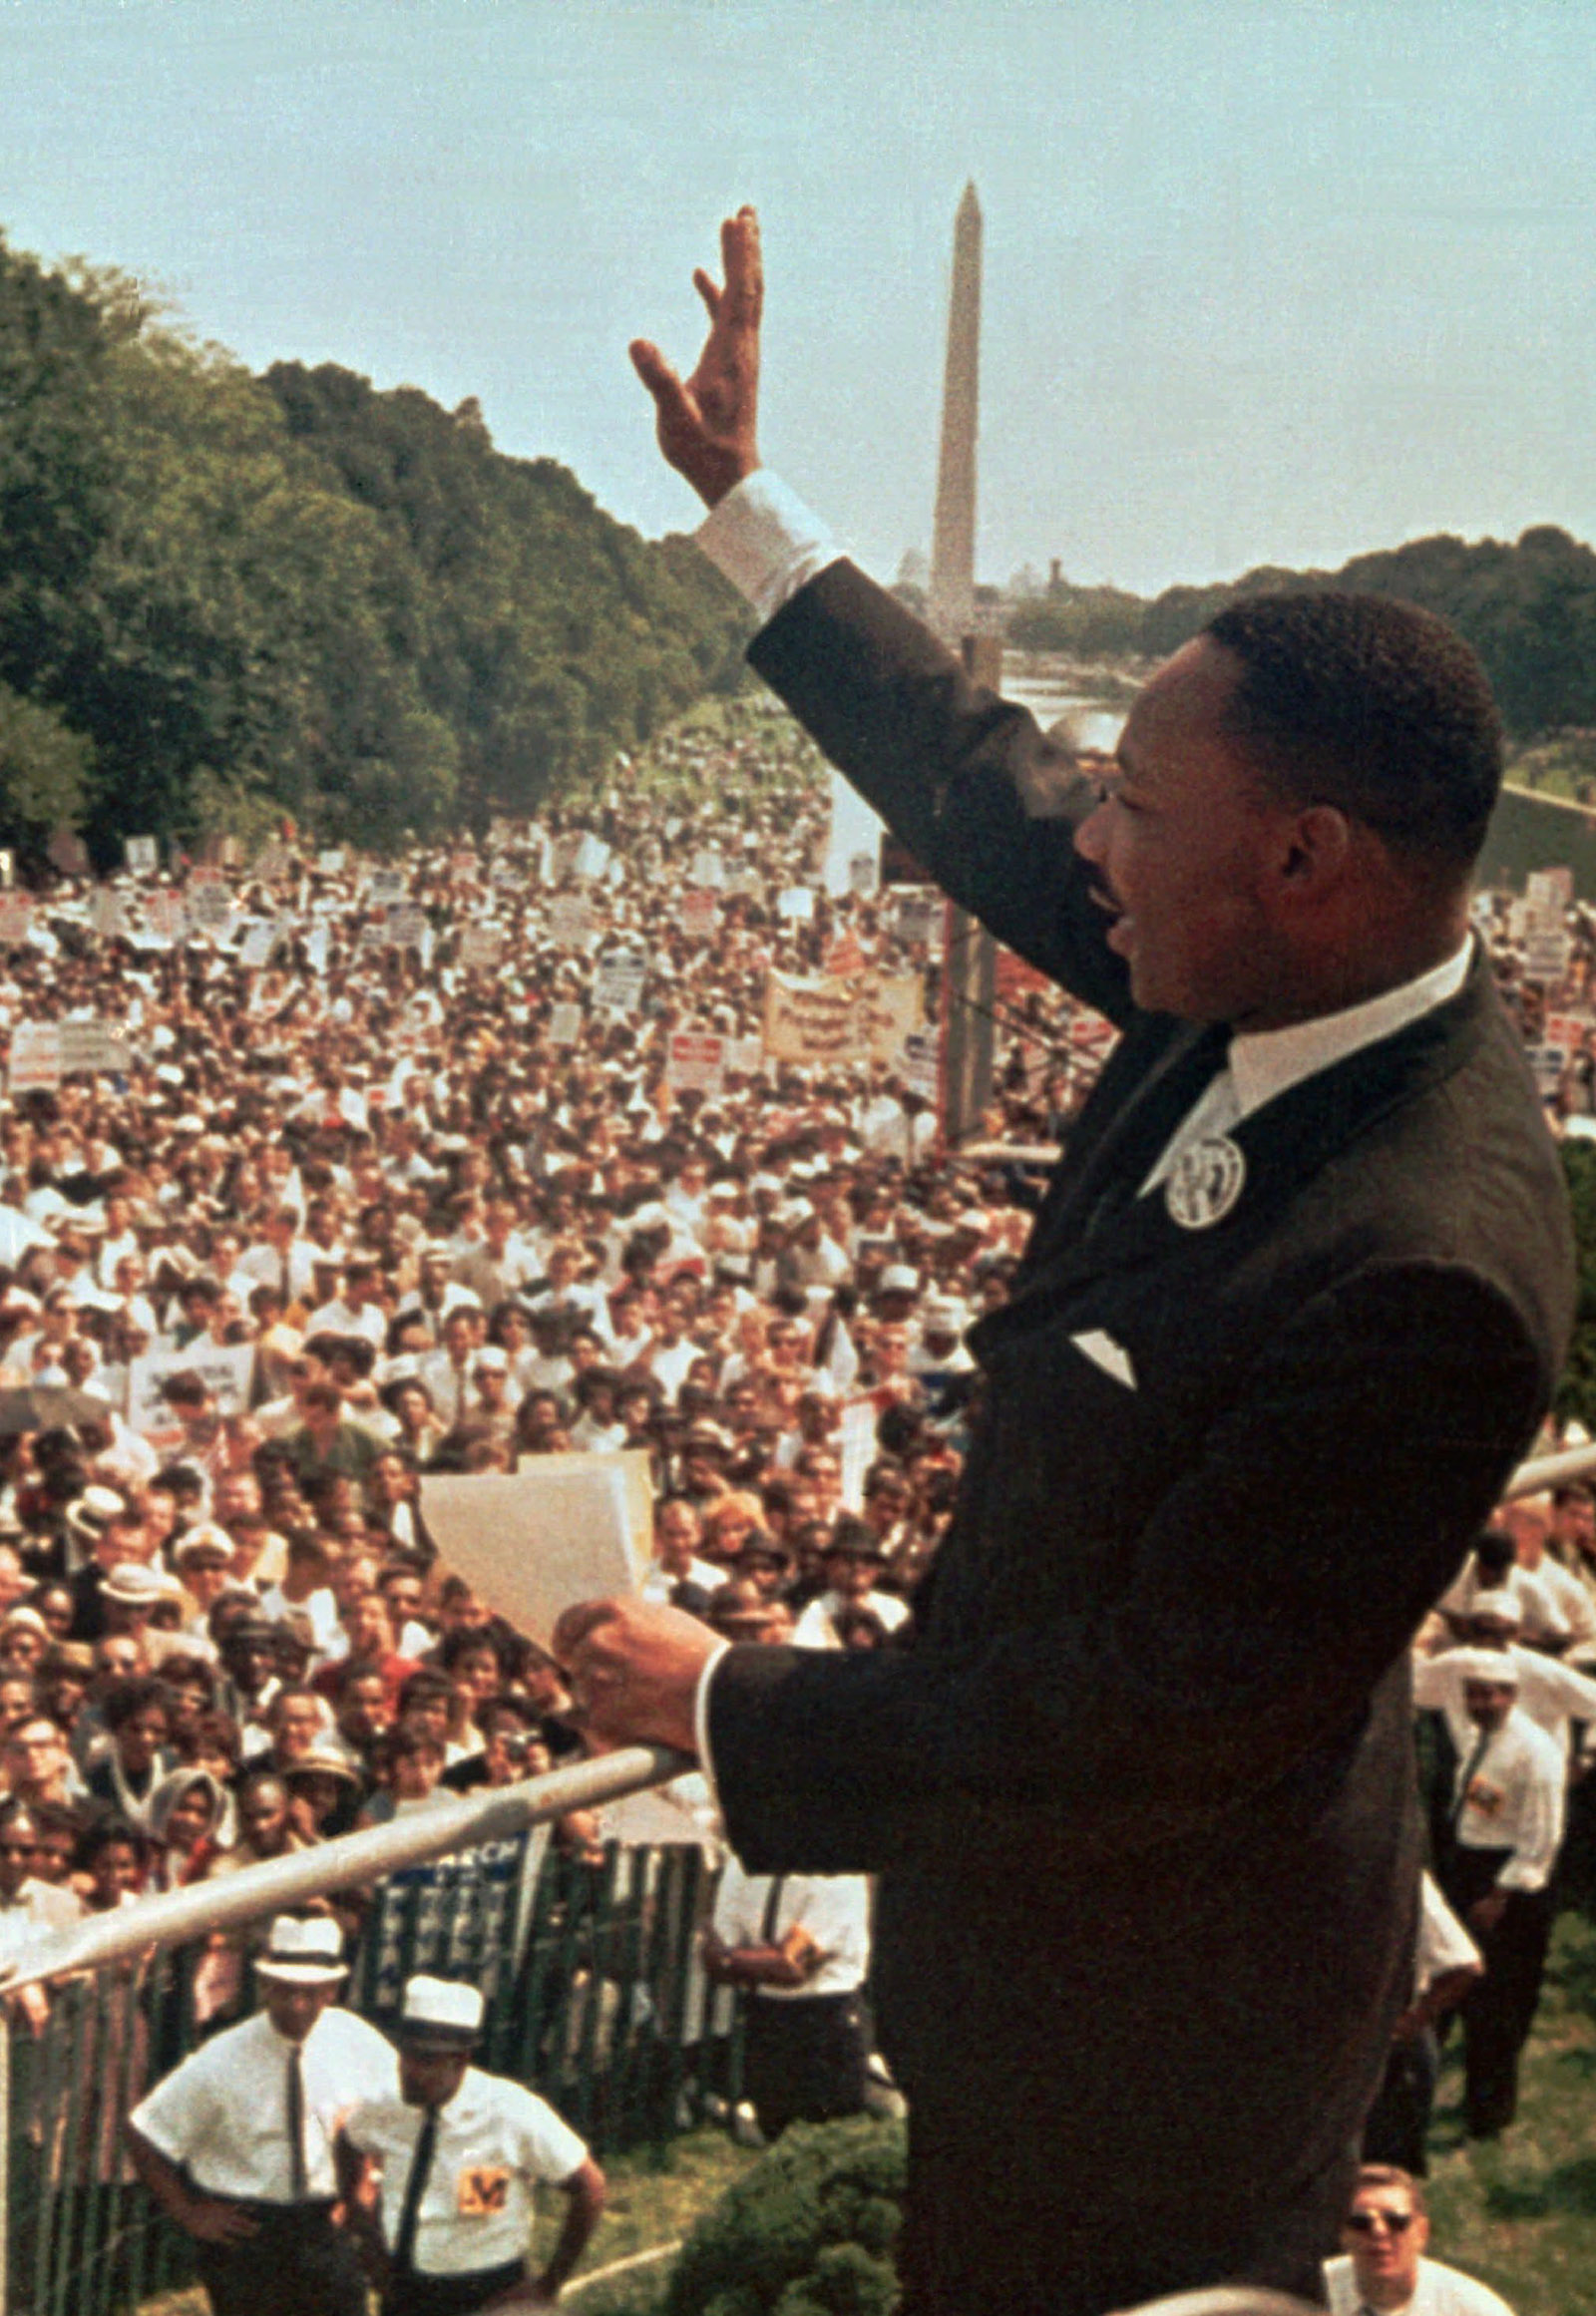 Ways to bring Martin Luther King Jr. alive to kids